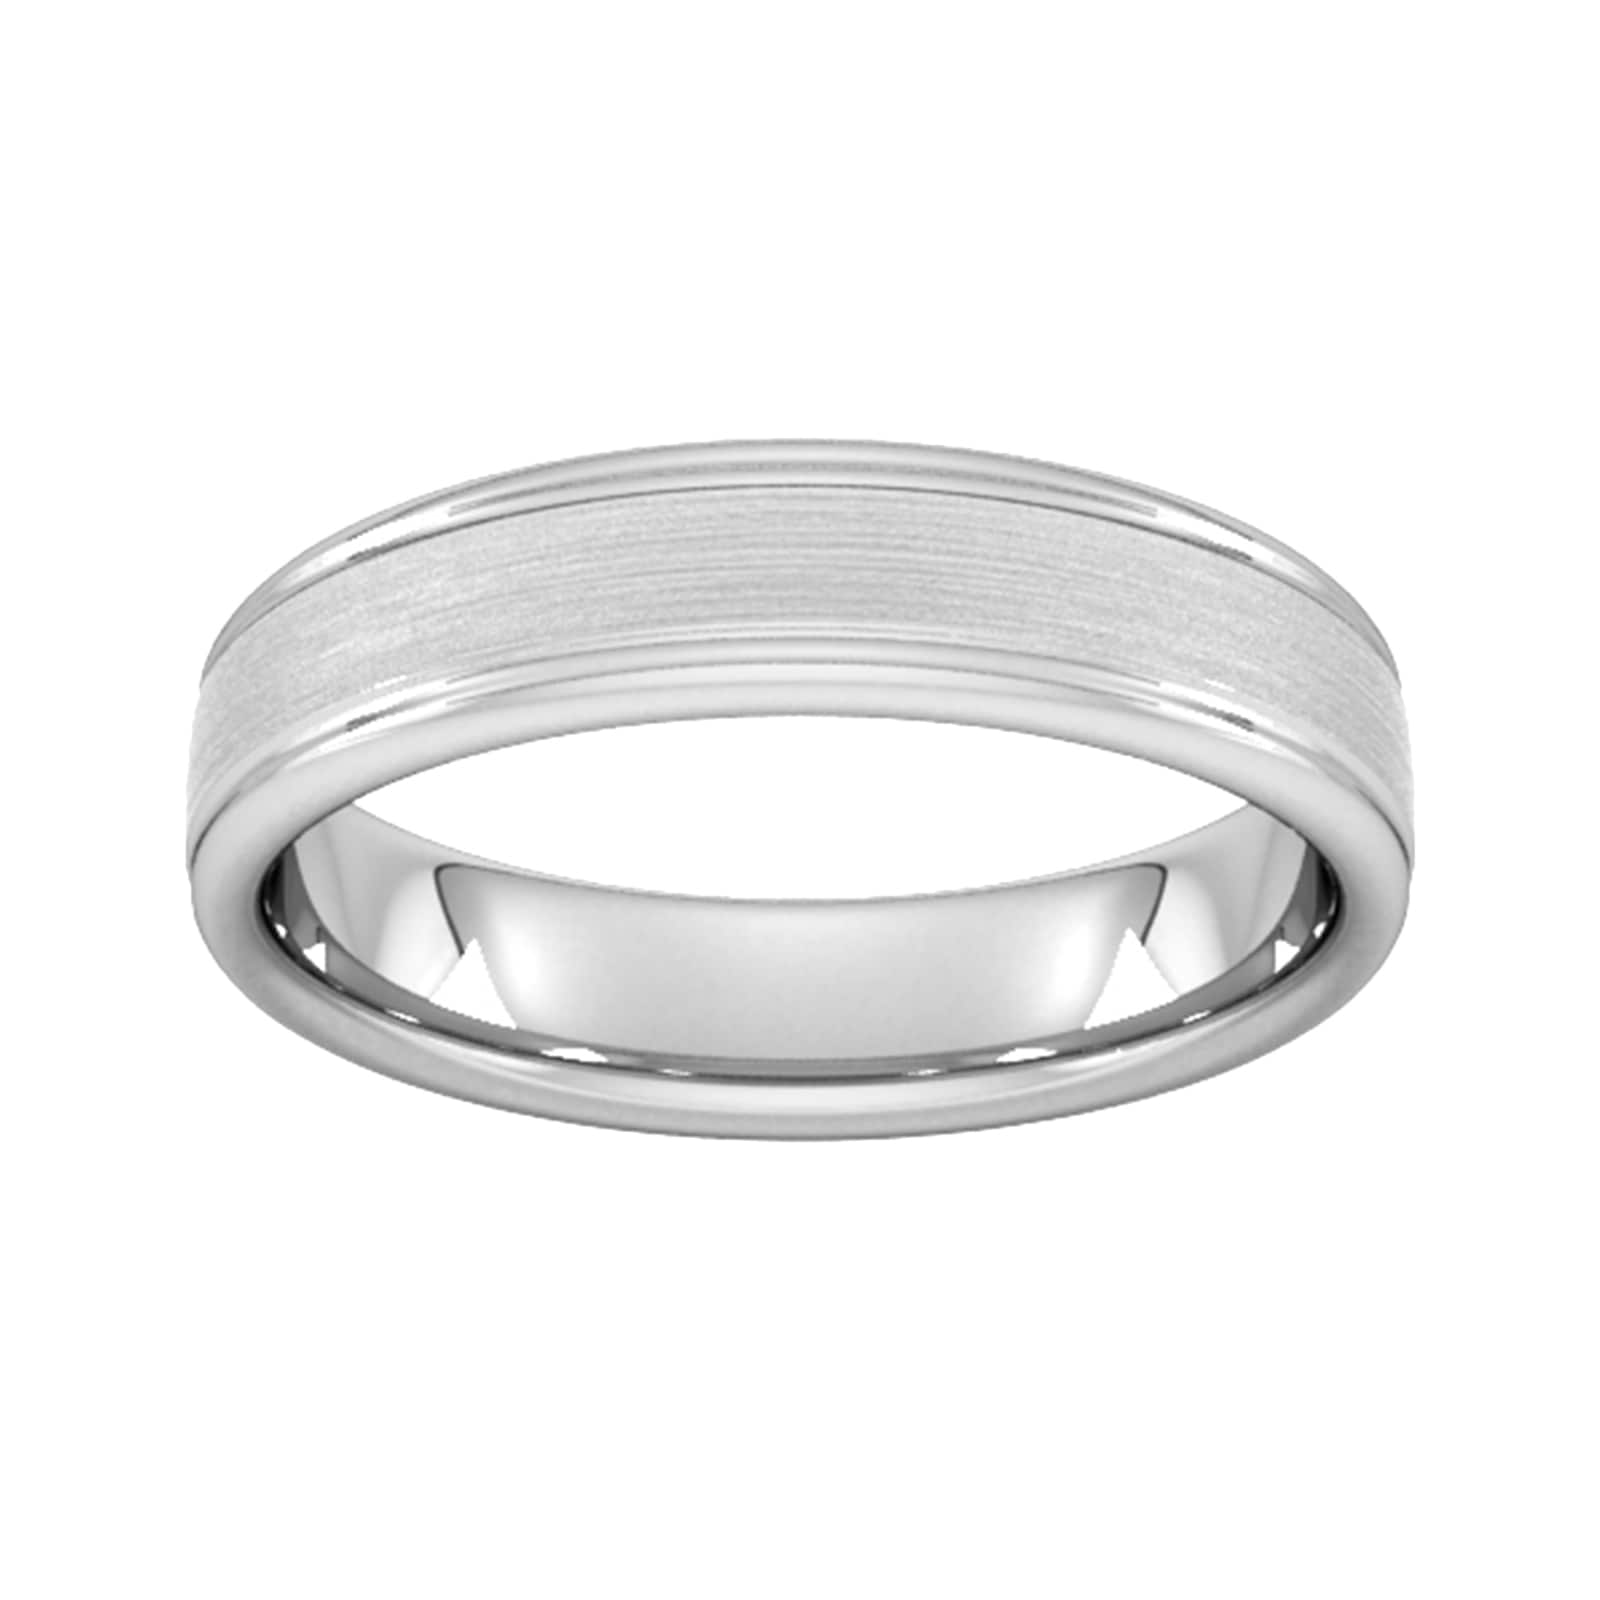 5mm D Shape Standard Matt Centre With Grooves Wedding Ring In 950 Palladium - Ring Size O